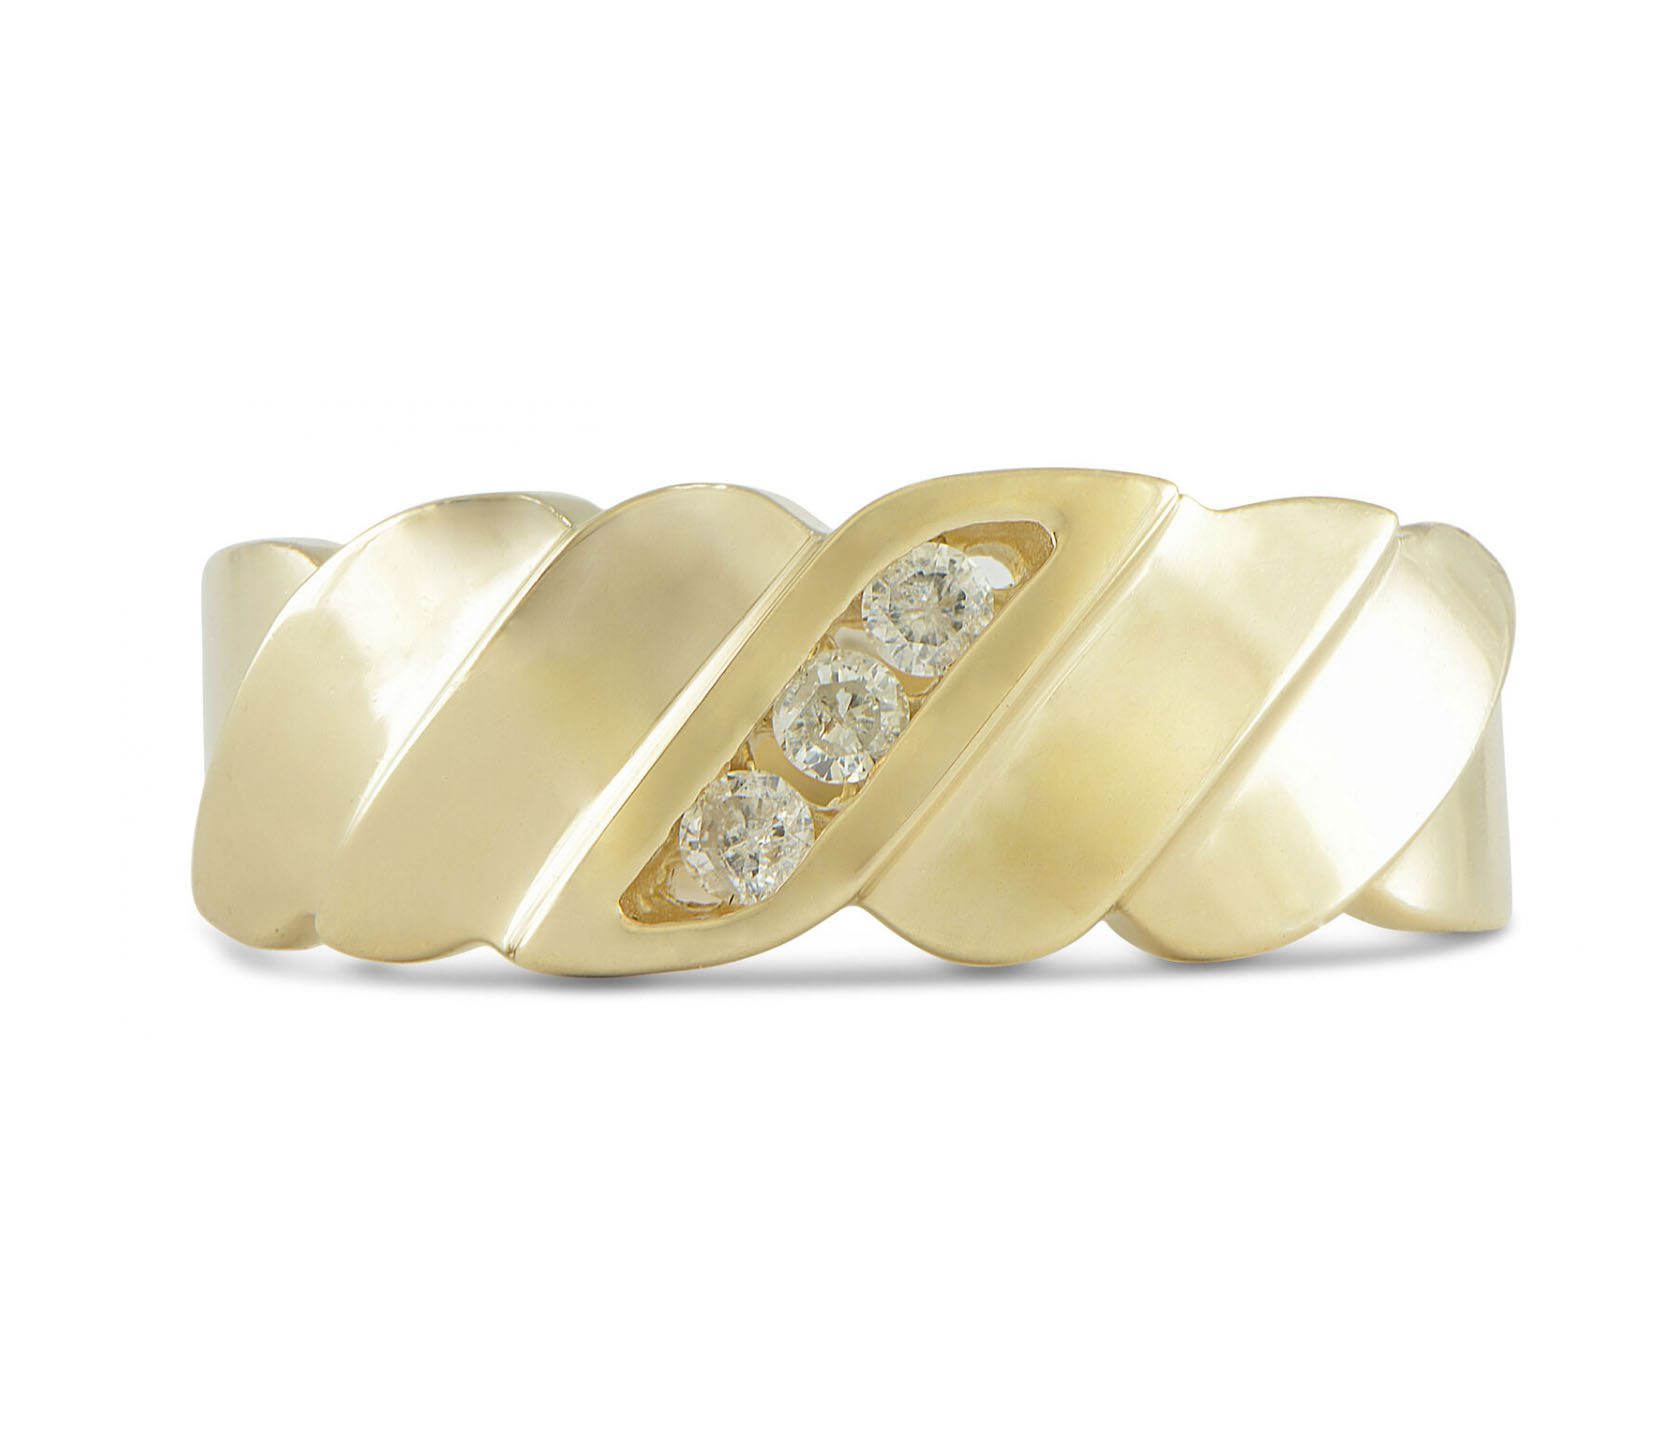 14k-Yellow-Gold-Diamond-Ring-Size-65-I1H-Channel-Set-Braided-Band-132274332022-1500x650